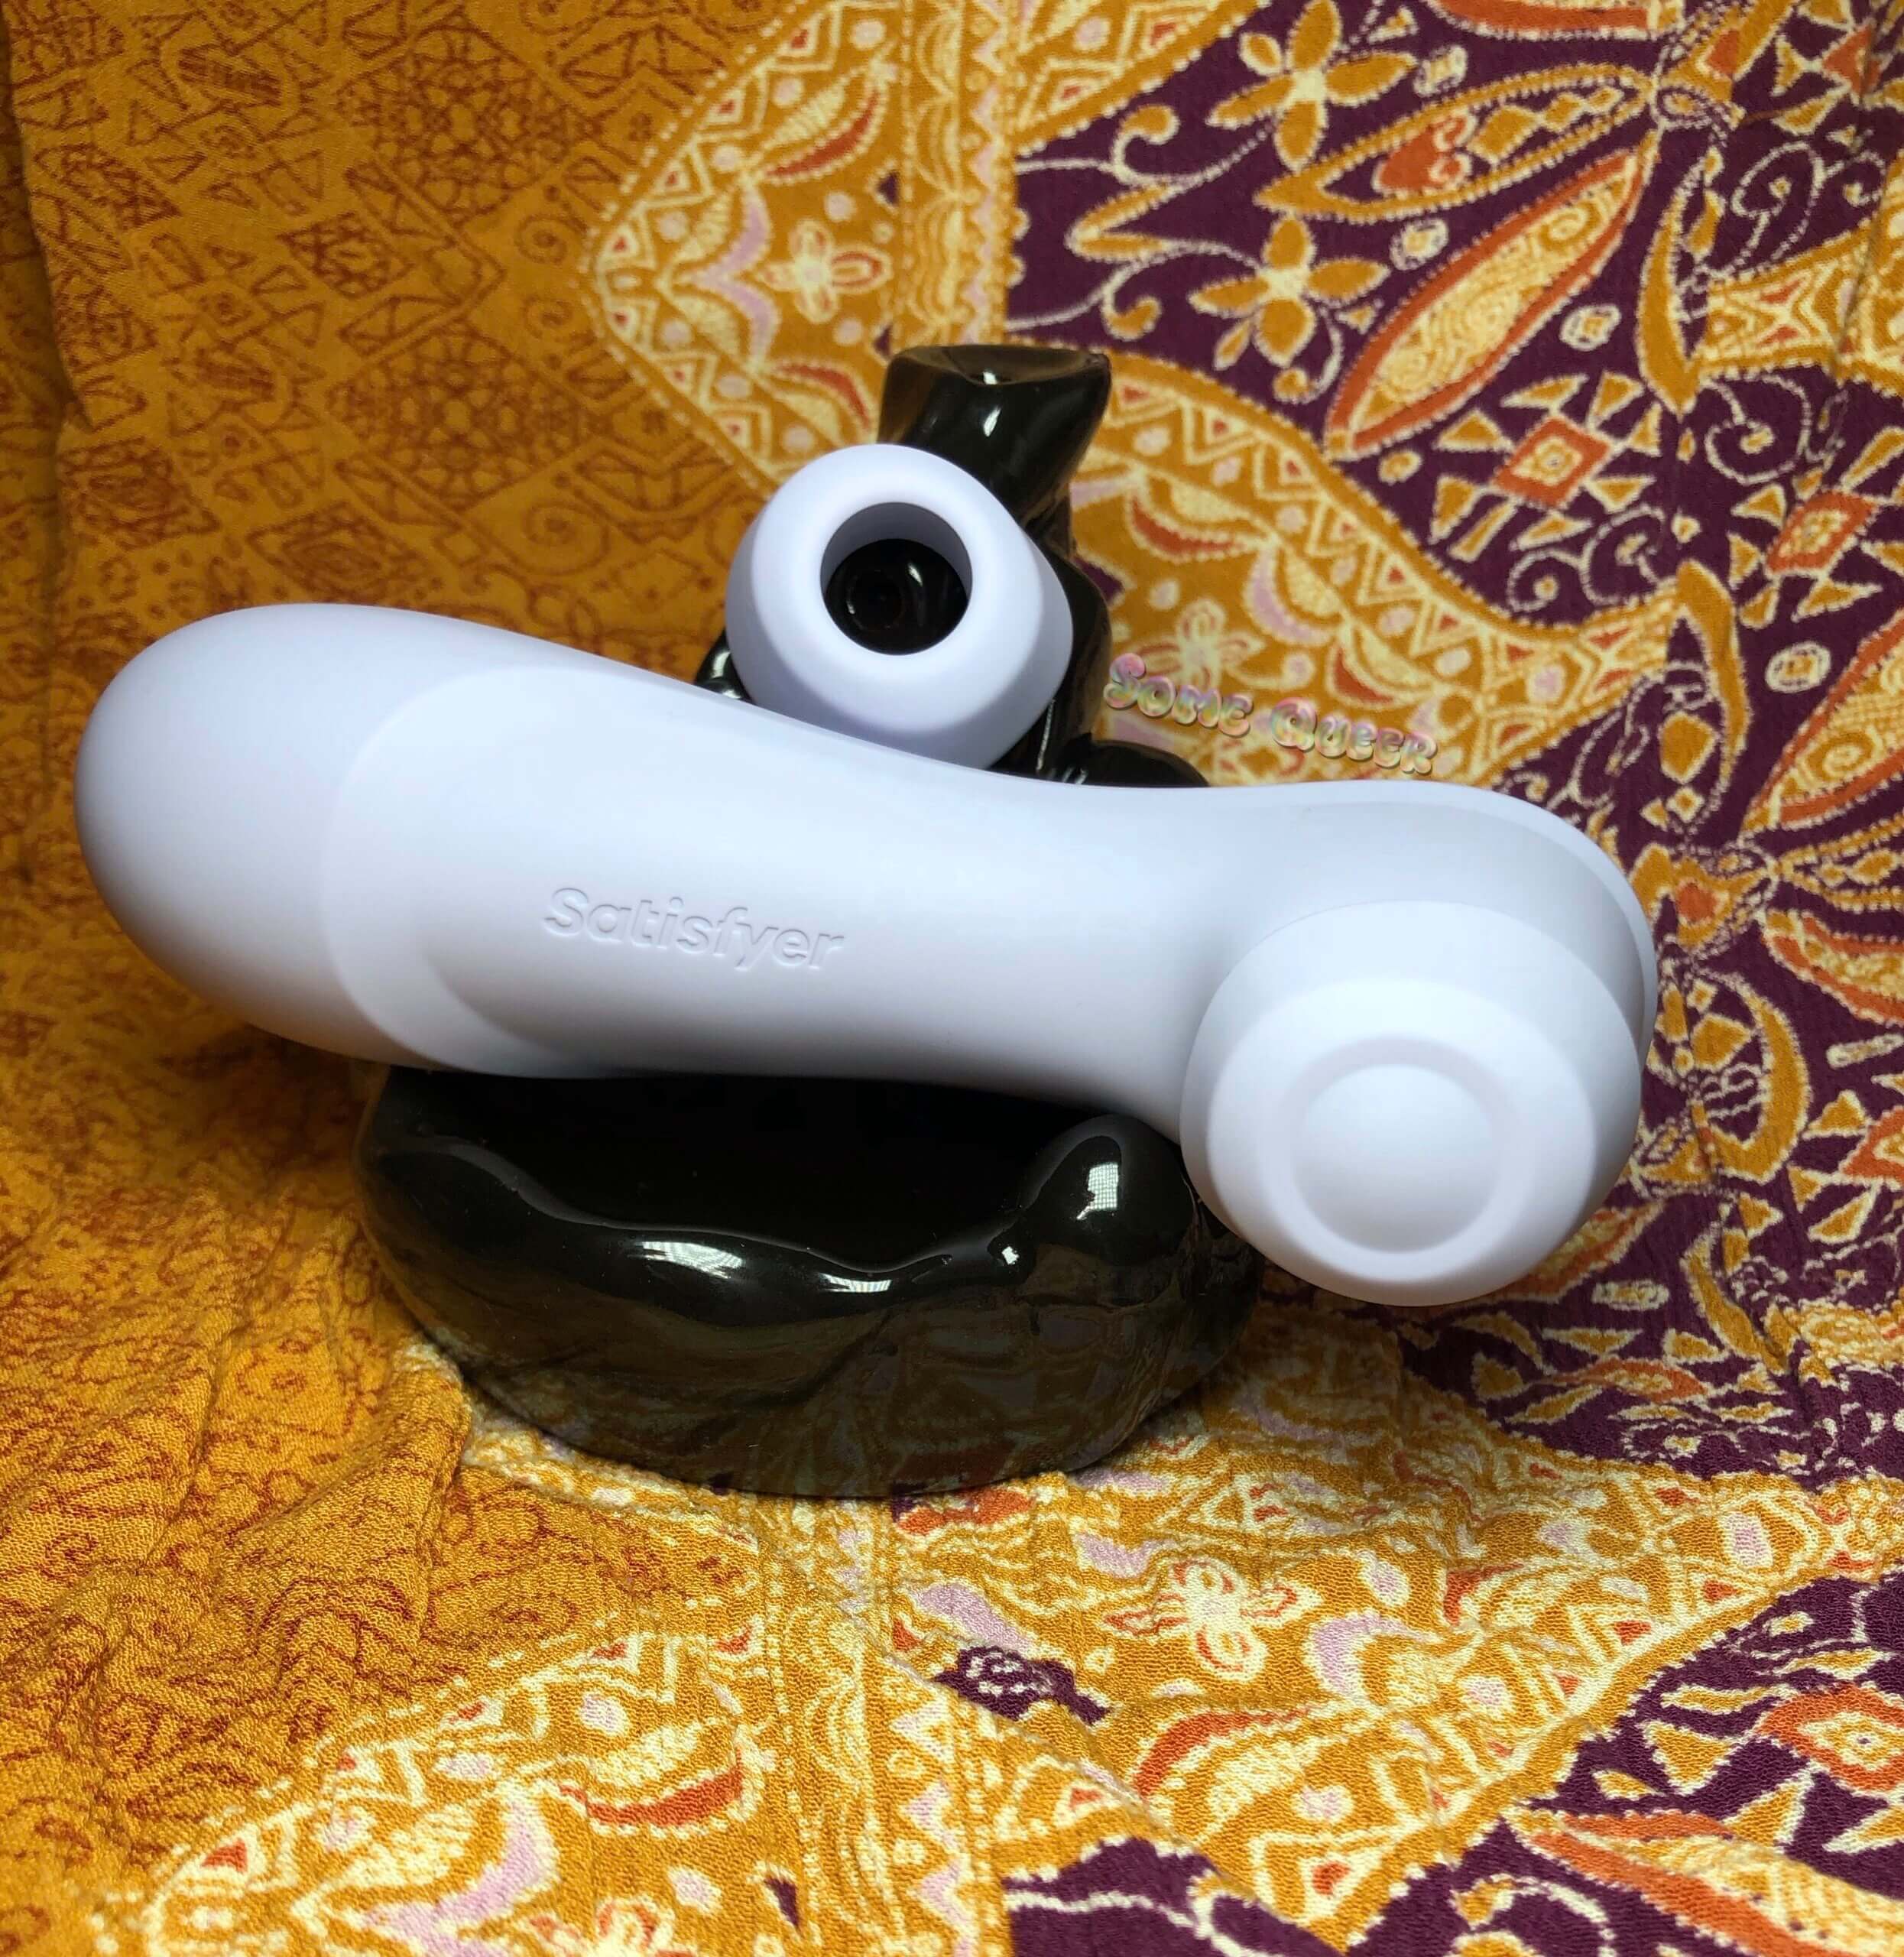 Satisfyer Pro 2 Gen 3 in lilac with liquid air cap attached, and classic air pulse cap resting on top. The toy is sitting in a shiny black decor piece.